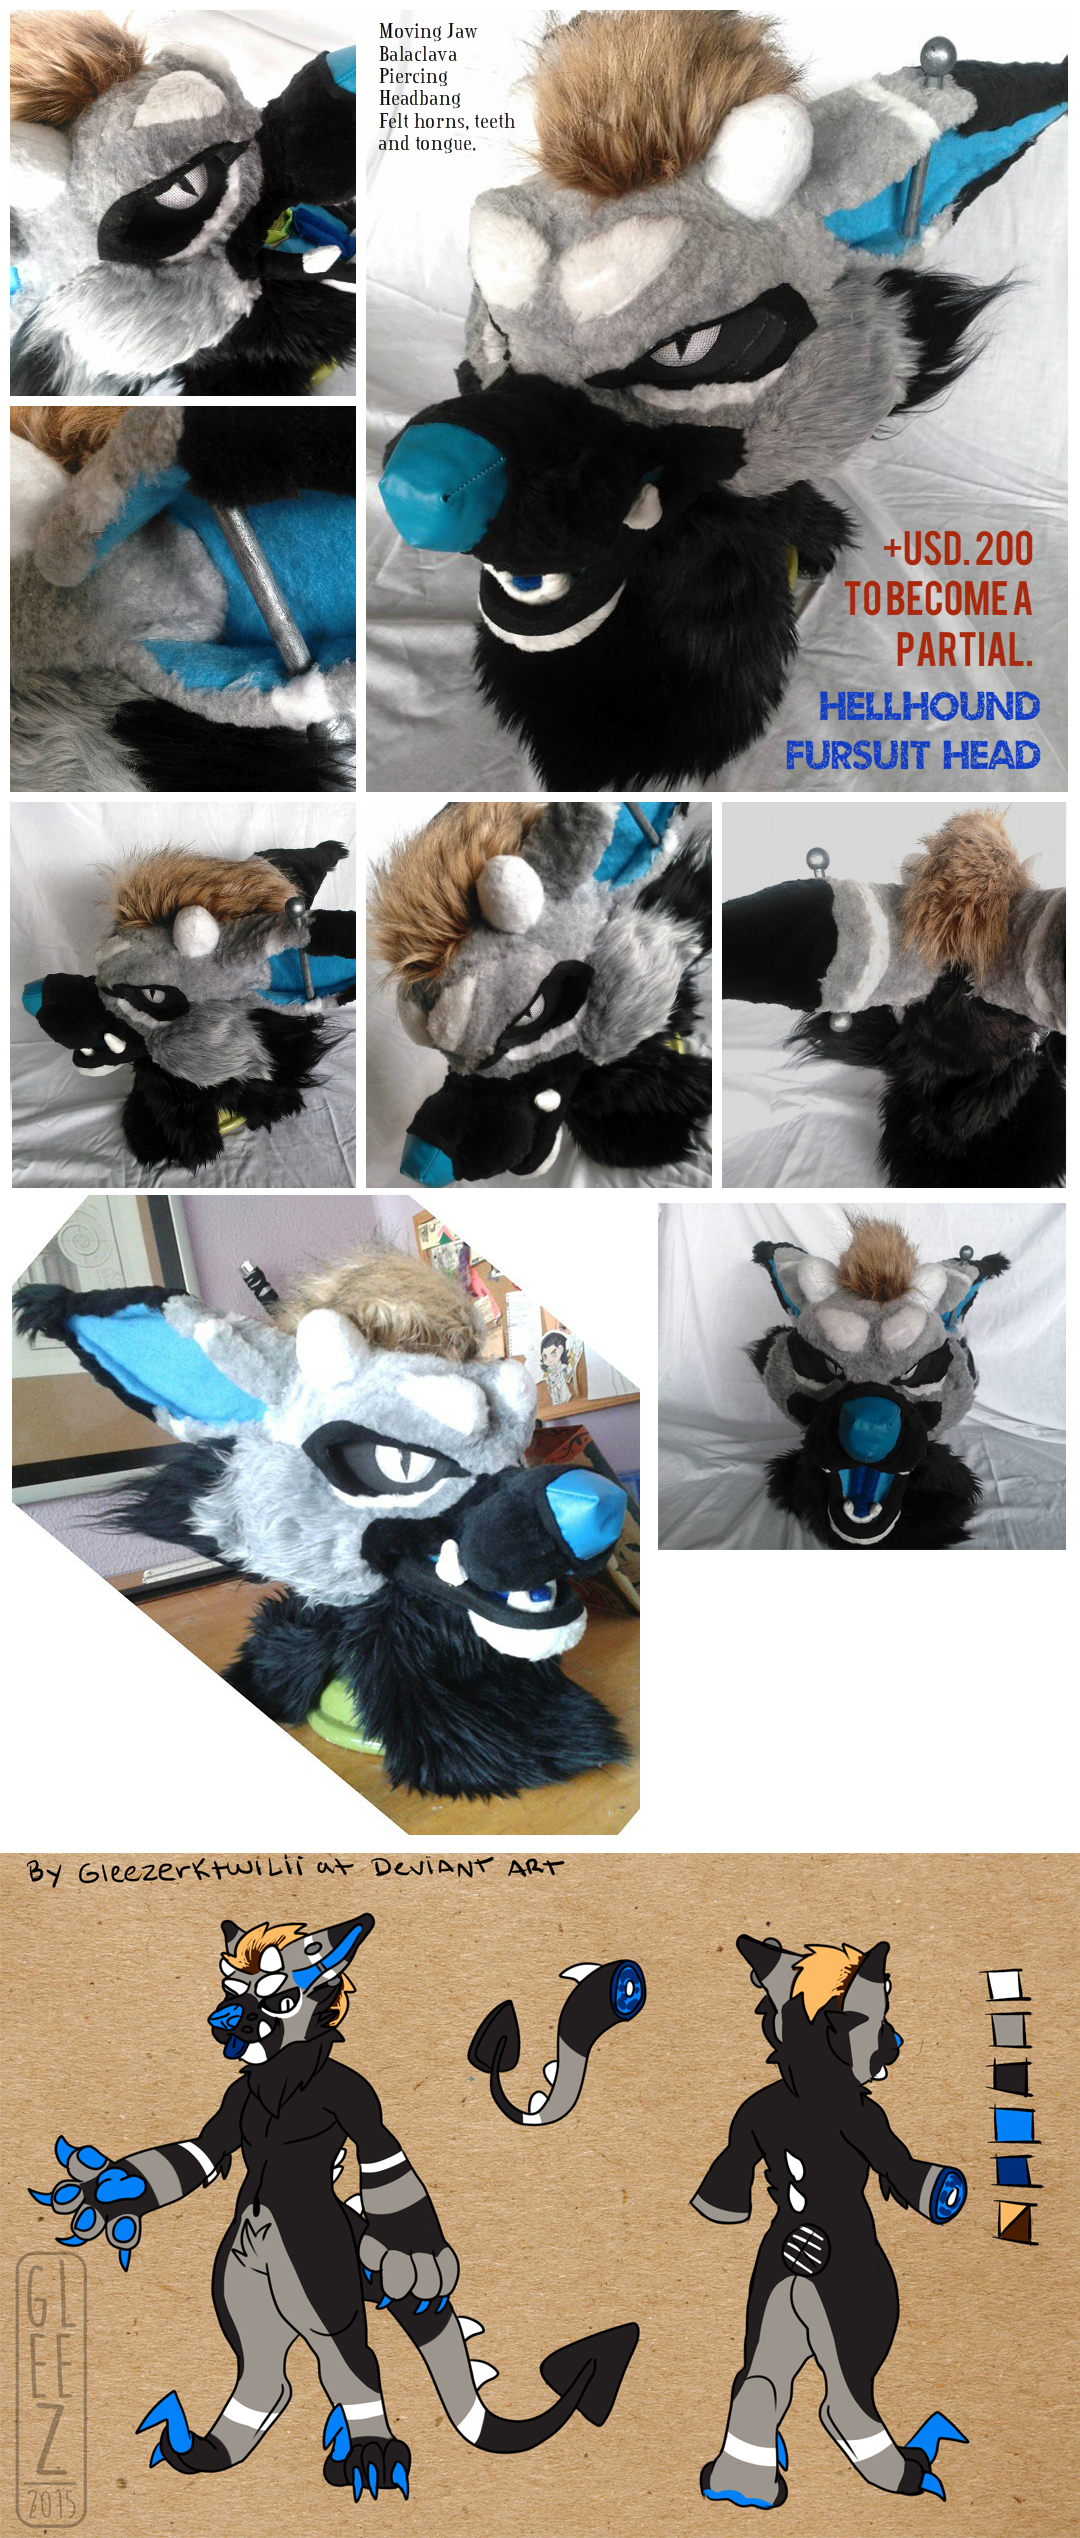 [SOLD!!] HELLHOUND FURSUIT HEAD AUCTION + charact by Reegulus on DeviantArt